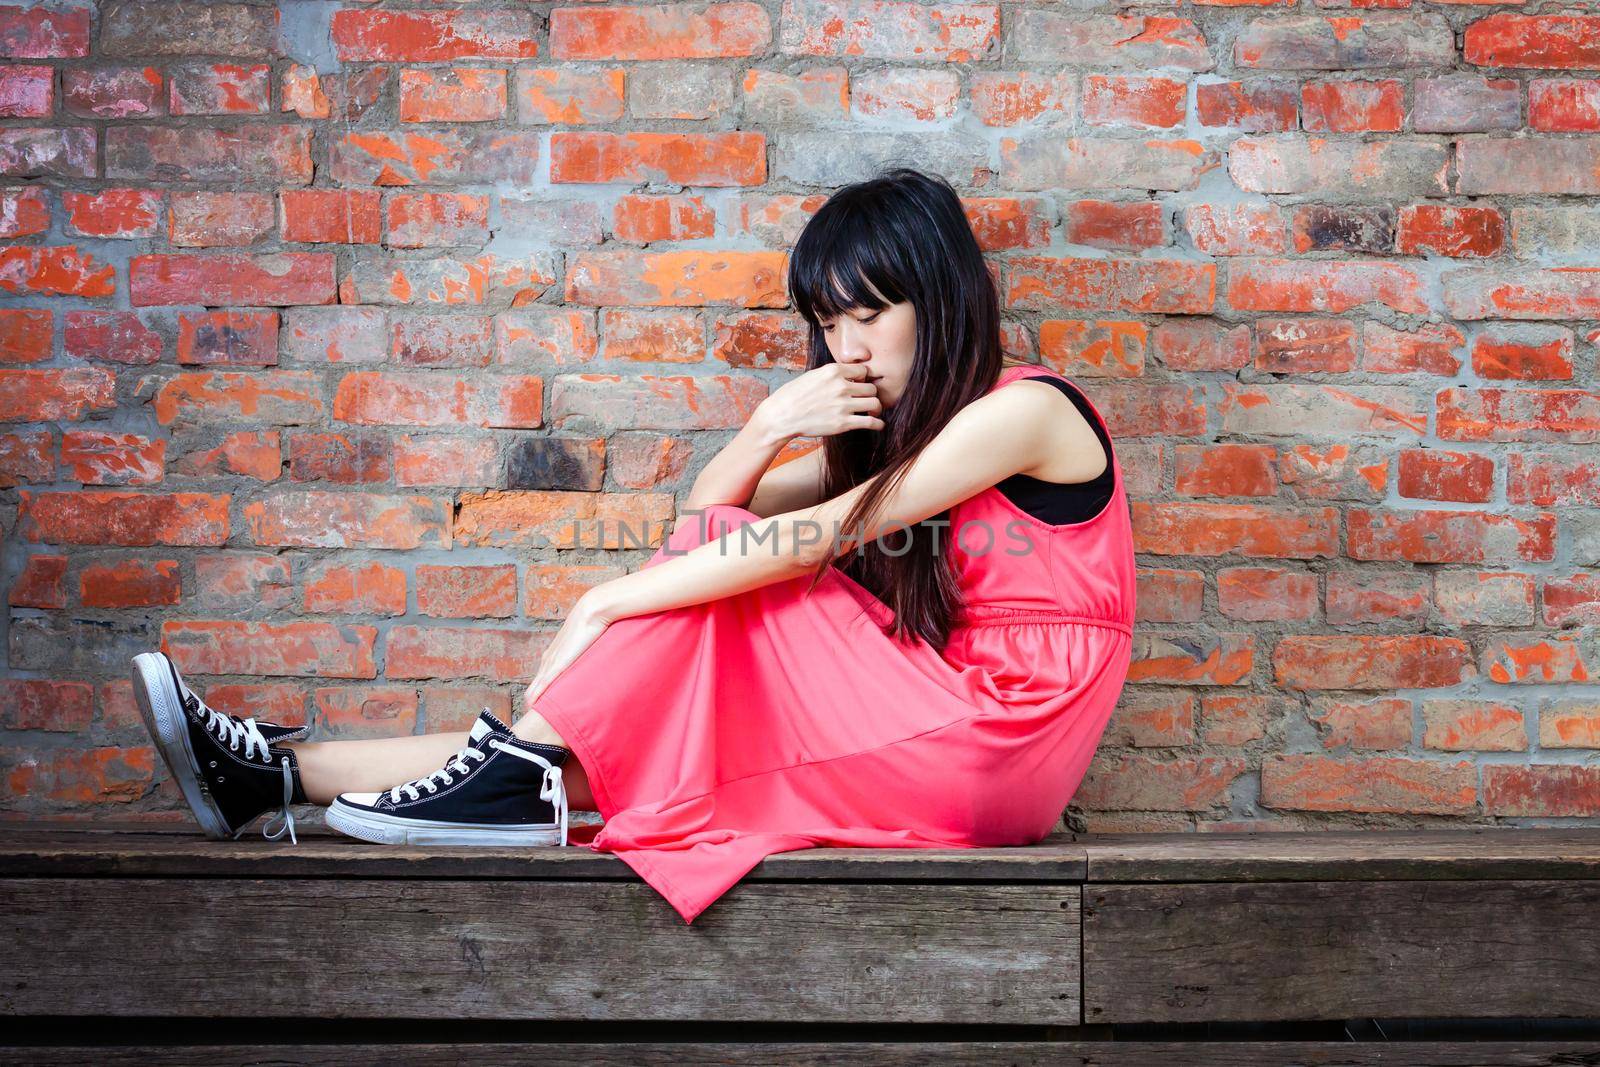 Young Asian woman sitting by red brick wall feeling depressed and sad